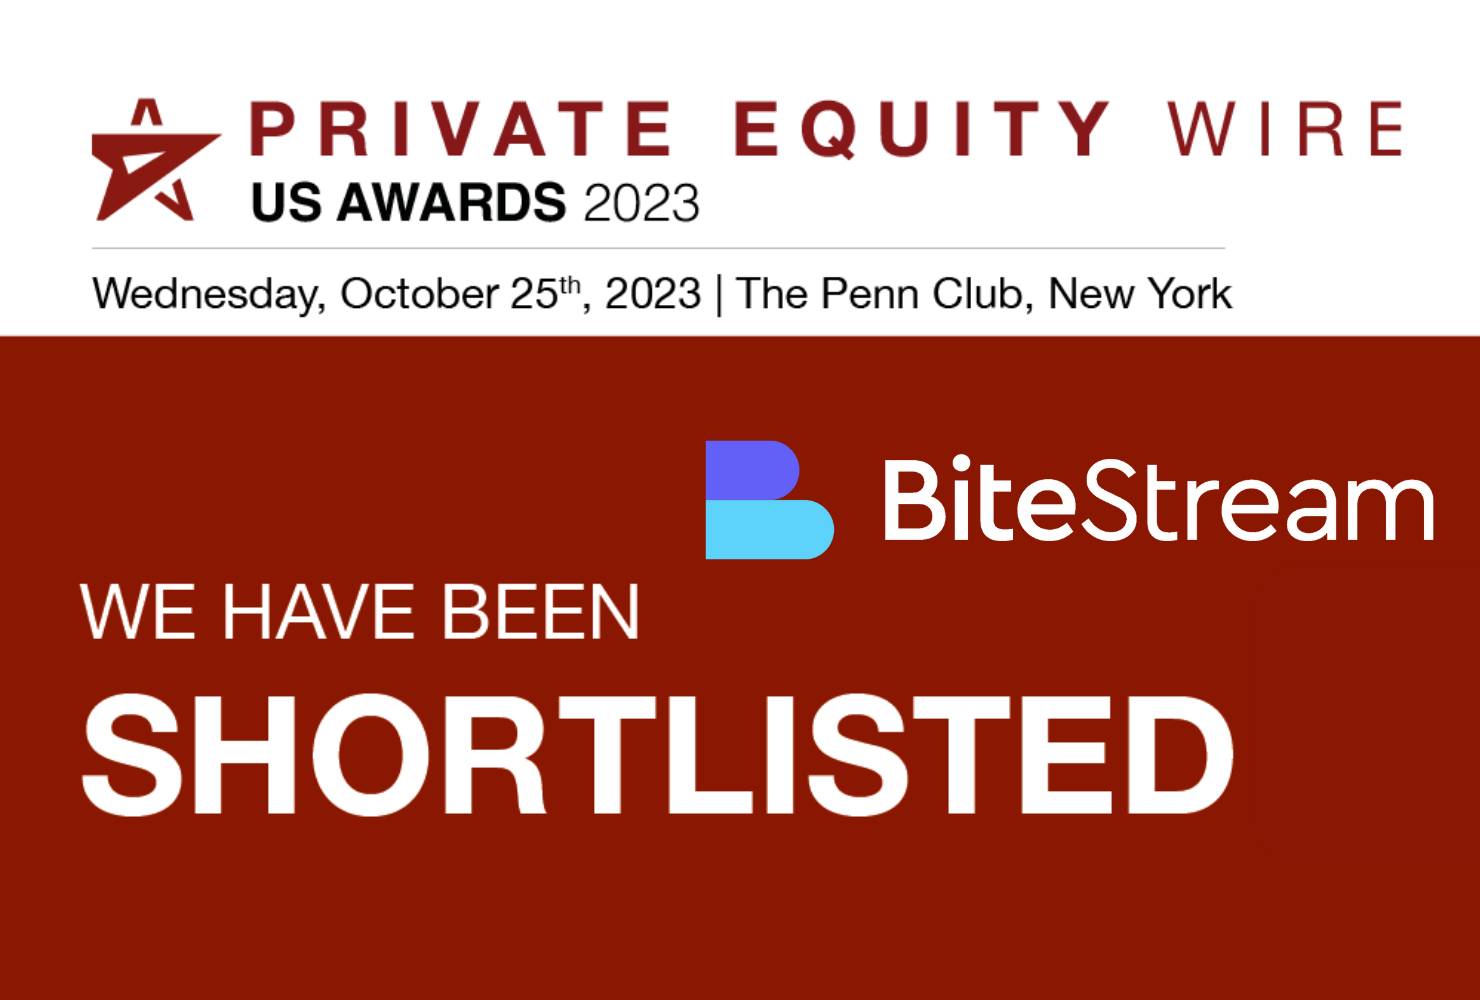 Bite Stream, Bite Investment's investor management solutions software, has been shortlisted for two awards at the Private Equity Wire US Awards 2023 for Best Fundraising Solution and Best Investor Relations Technology. The awards run by Global Funds Media and Bloomberg, determine the service provider shortlist by survey going to over 500 asset managers/ General Partners (GPs). The winners are then decided by a vote.